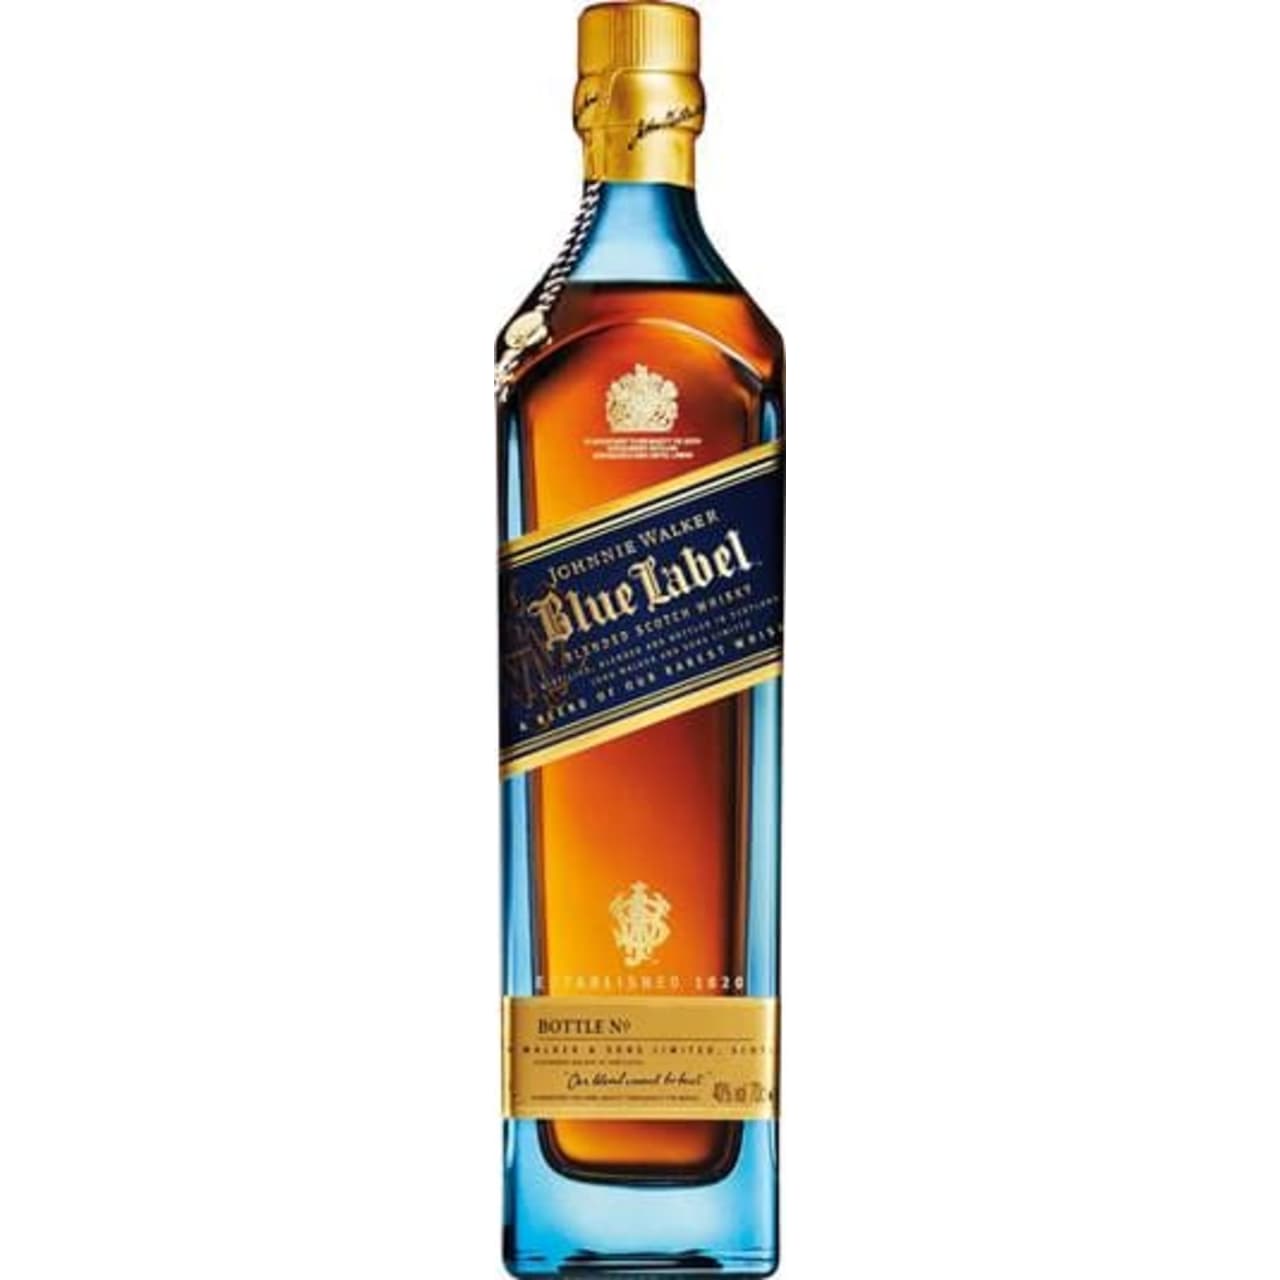 Johnnie Walker Blue Label is an exclusive blended scotch made from some of Scotland's rarest and most exceptional whiskies. Only one in every 10,000 casks has the elusive quality, character and flavour to deliver the remarkable signature taste of Johnnie Walker Blue Label.